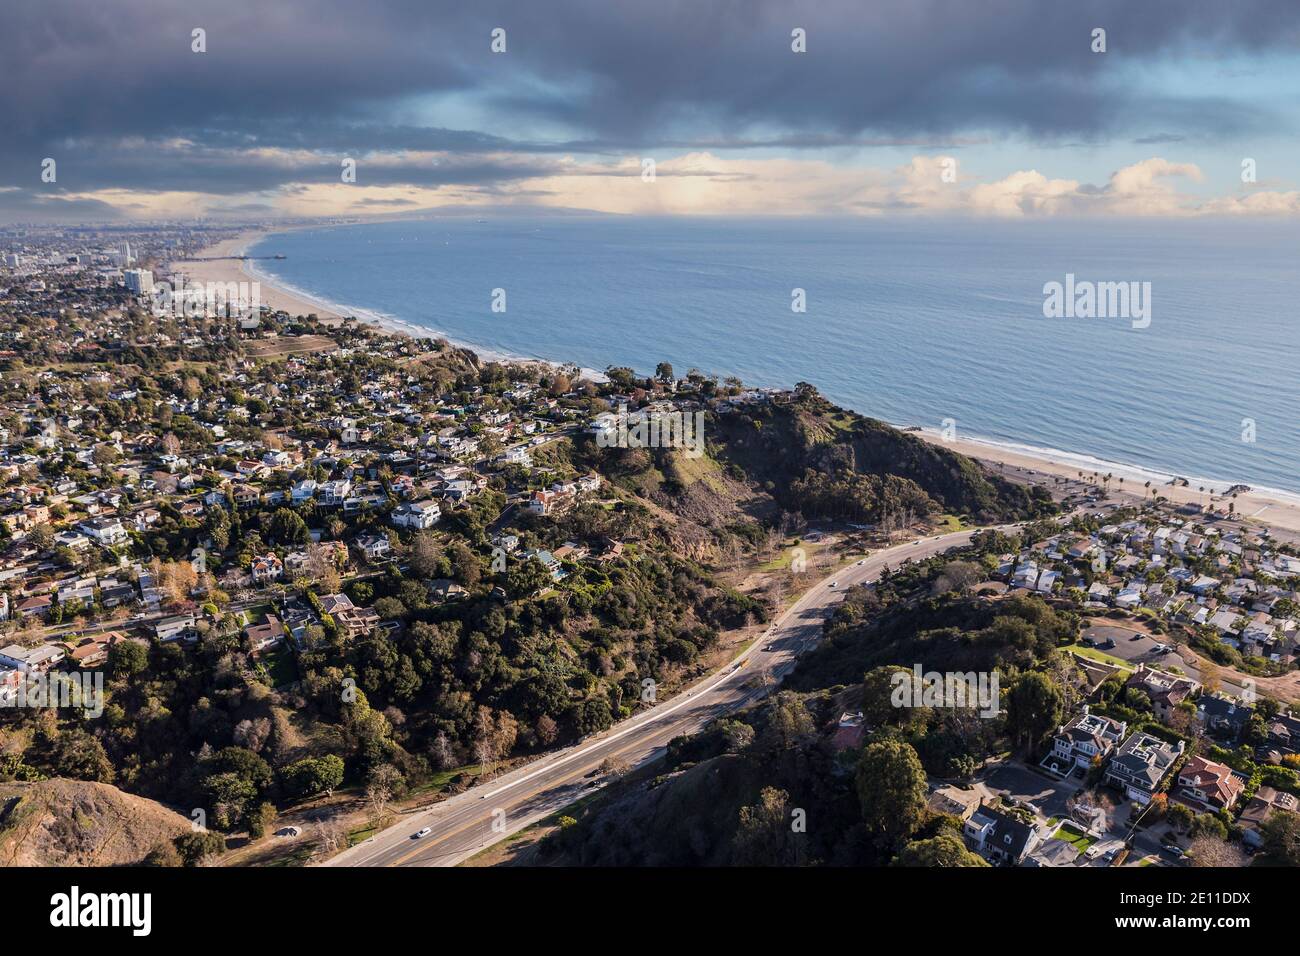 Aerial of Temescal Canyon Road and Pacific Palisades neighborhoods with stormy sky near Santa Monica Bay in Southern California. Stock Photo